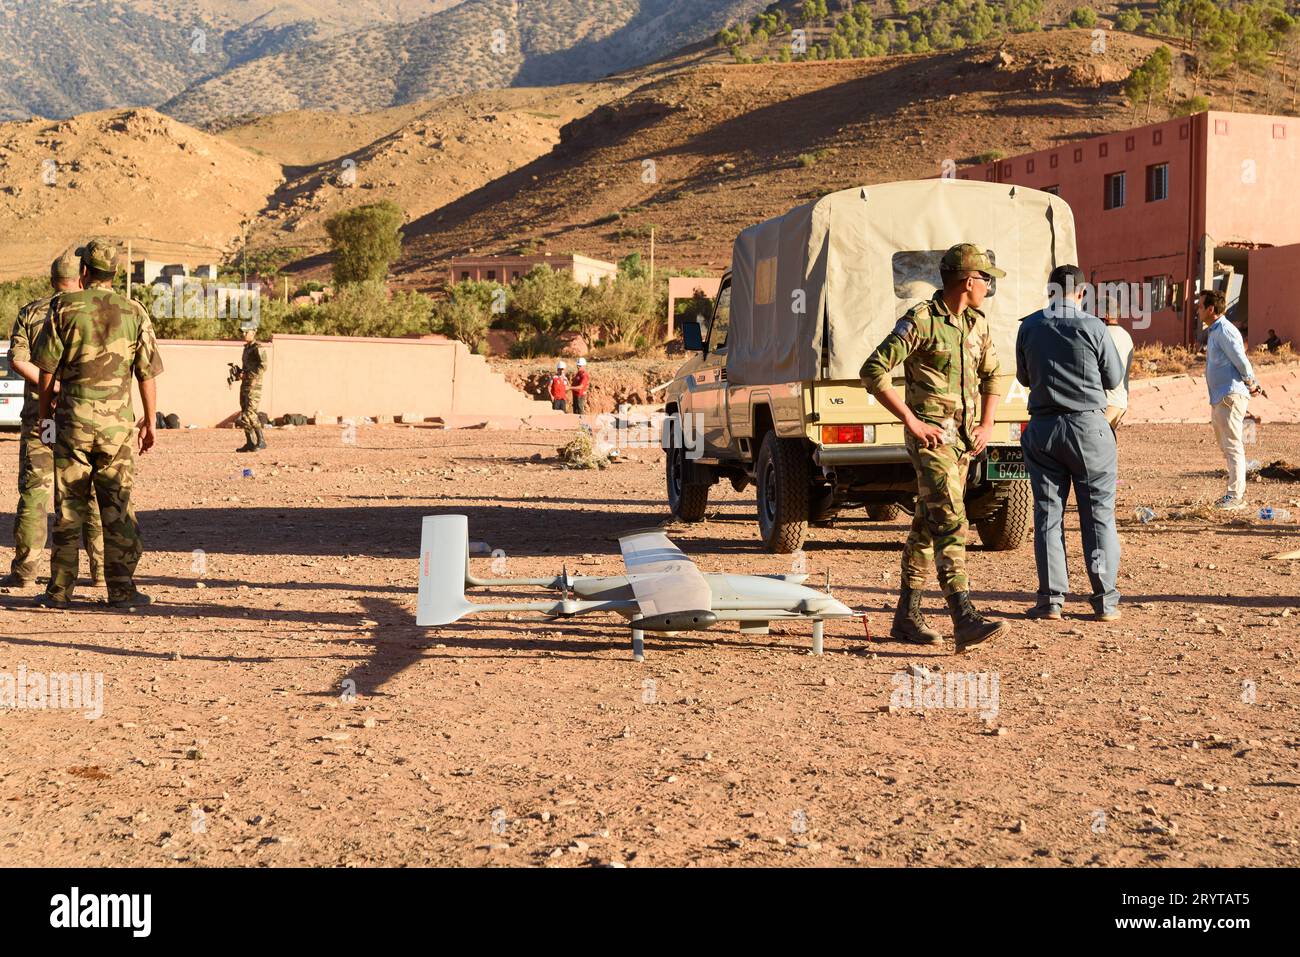 Amizmiz, Morocco - 10 September 2023: a military drone aircraft is seen on the ground being operated by military personnel in the desert Stock Photo